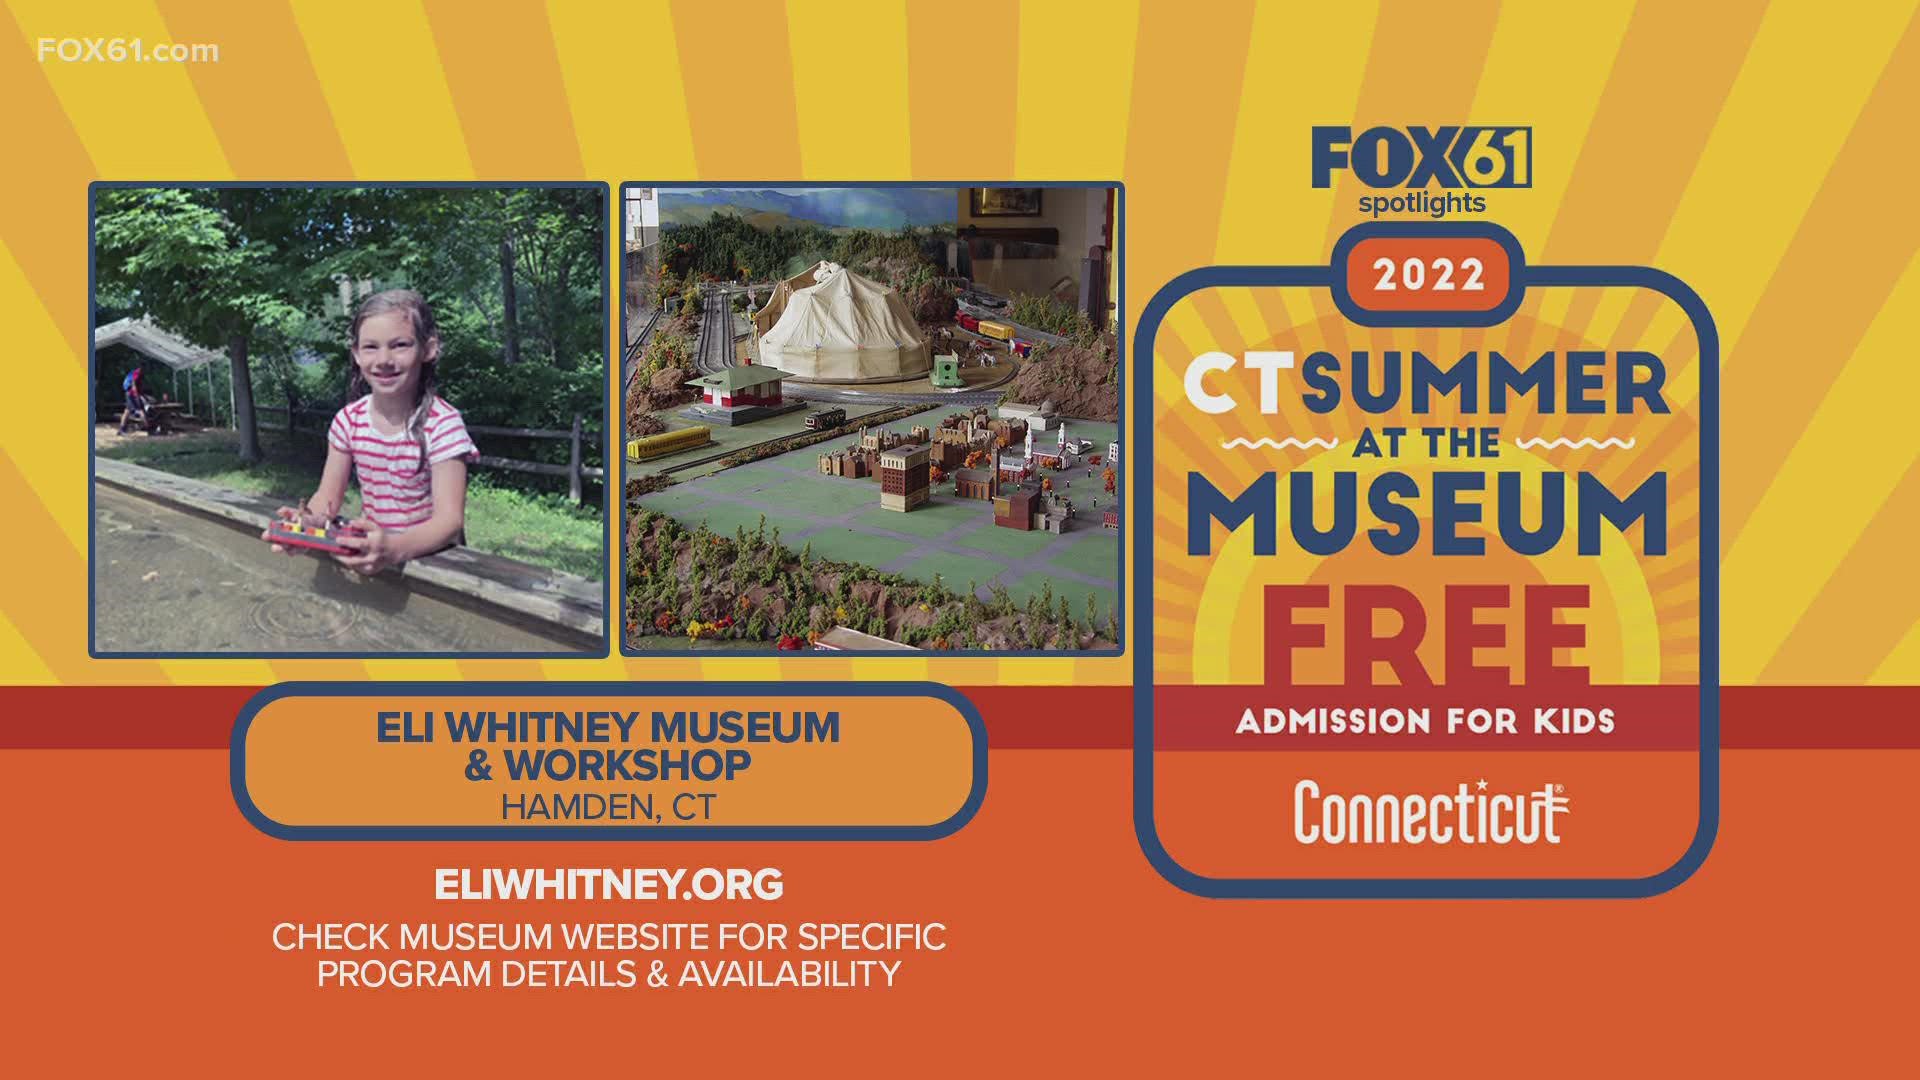 Kids 18 and under can visit the Eli Whitney Museum and workshop for free with an adult who is a resident of Connecticut. It runs through Sept. 5.